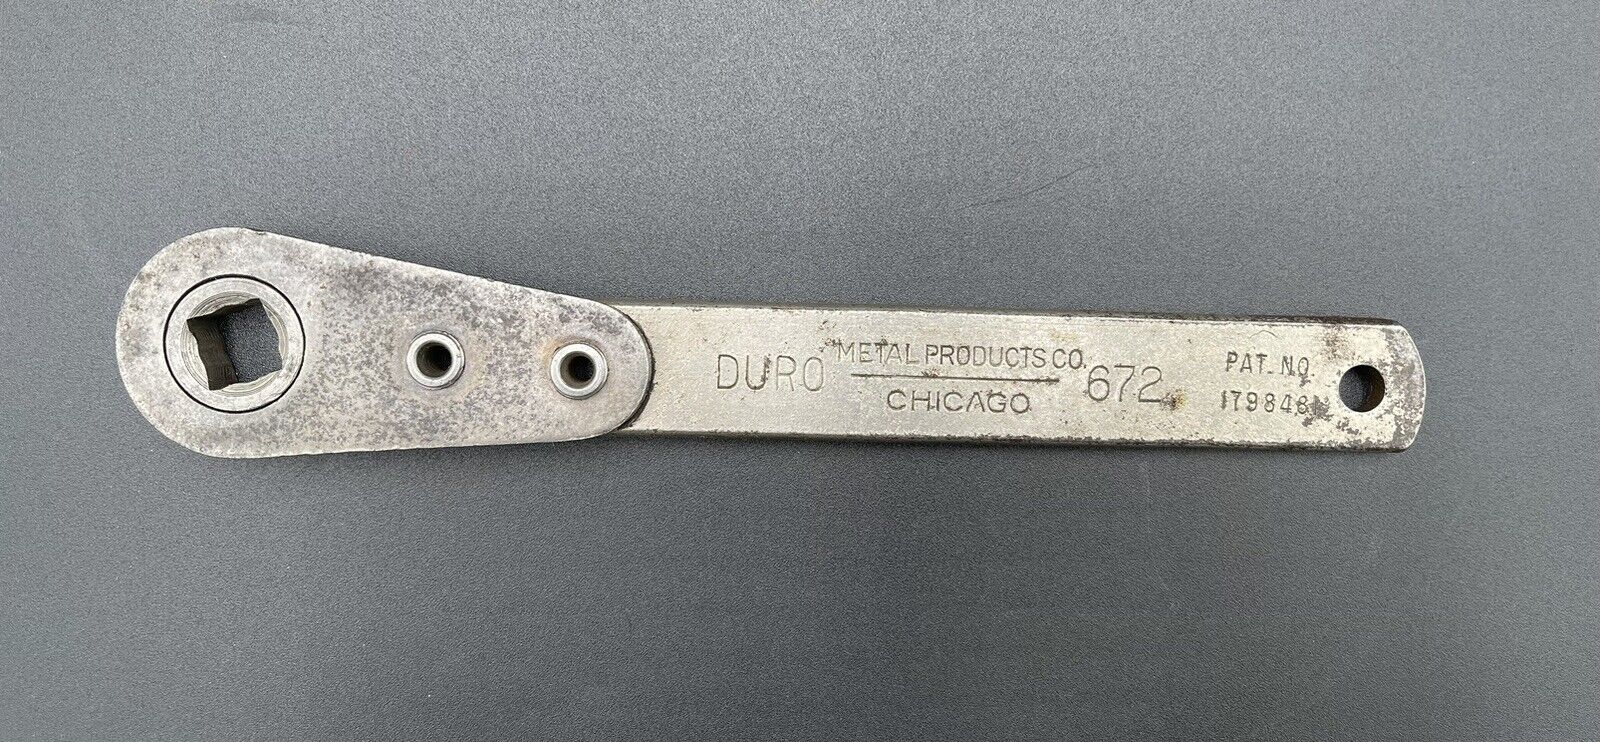 Vintage Duro Metal Products Co. 672 Square Drive Ratchet, Made in USA Chicago